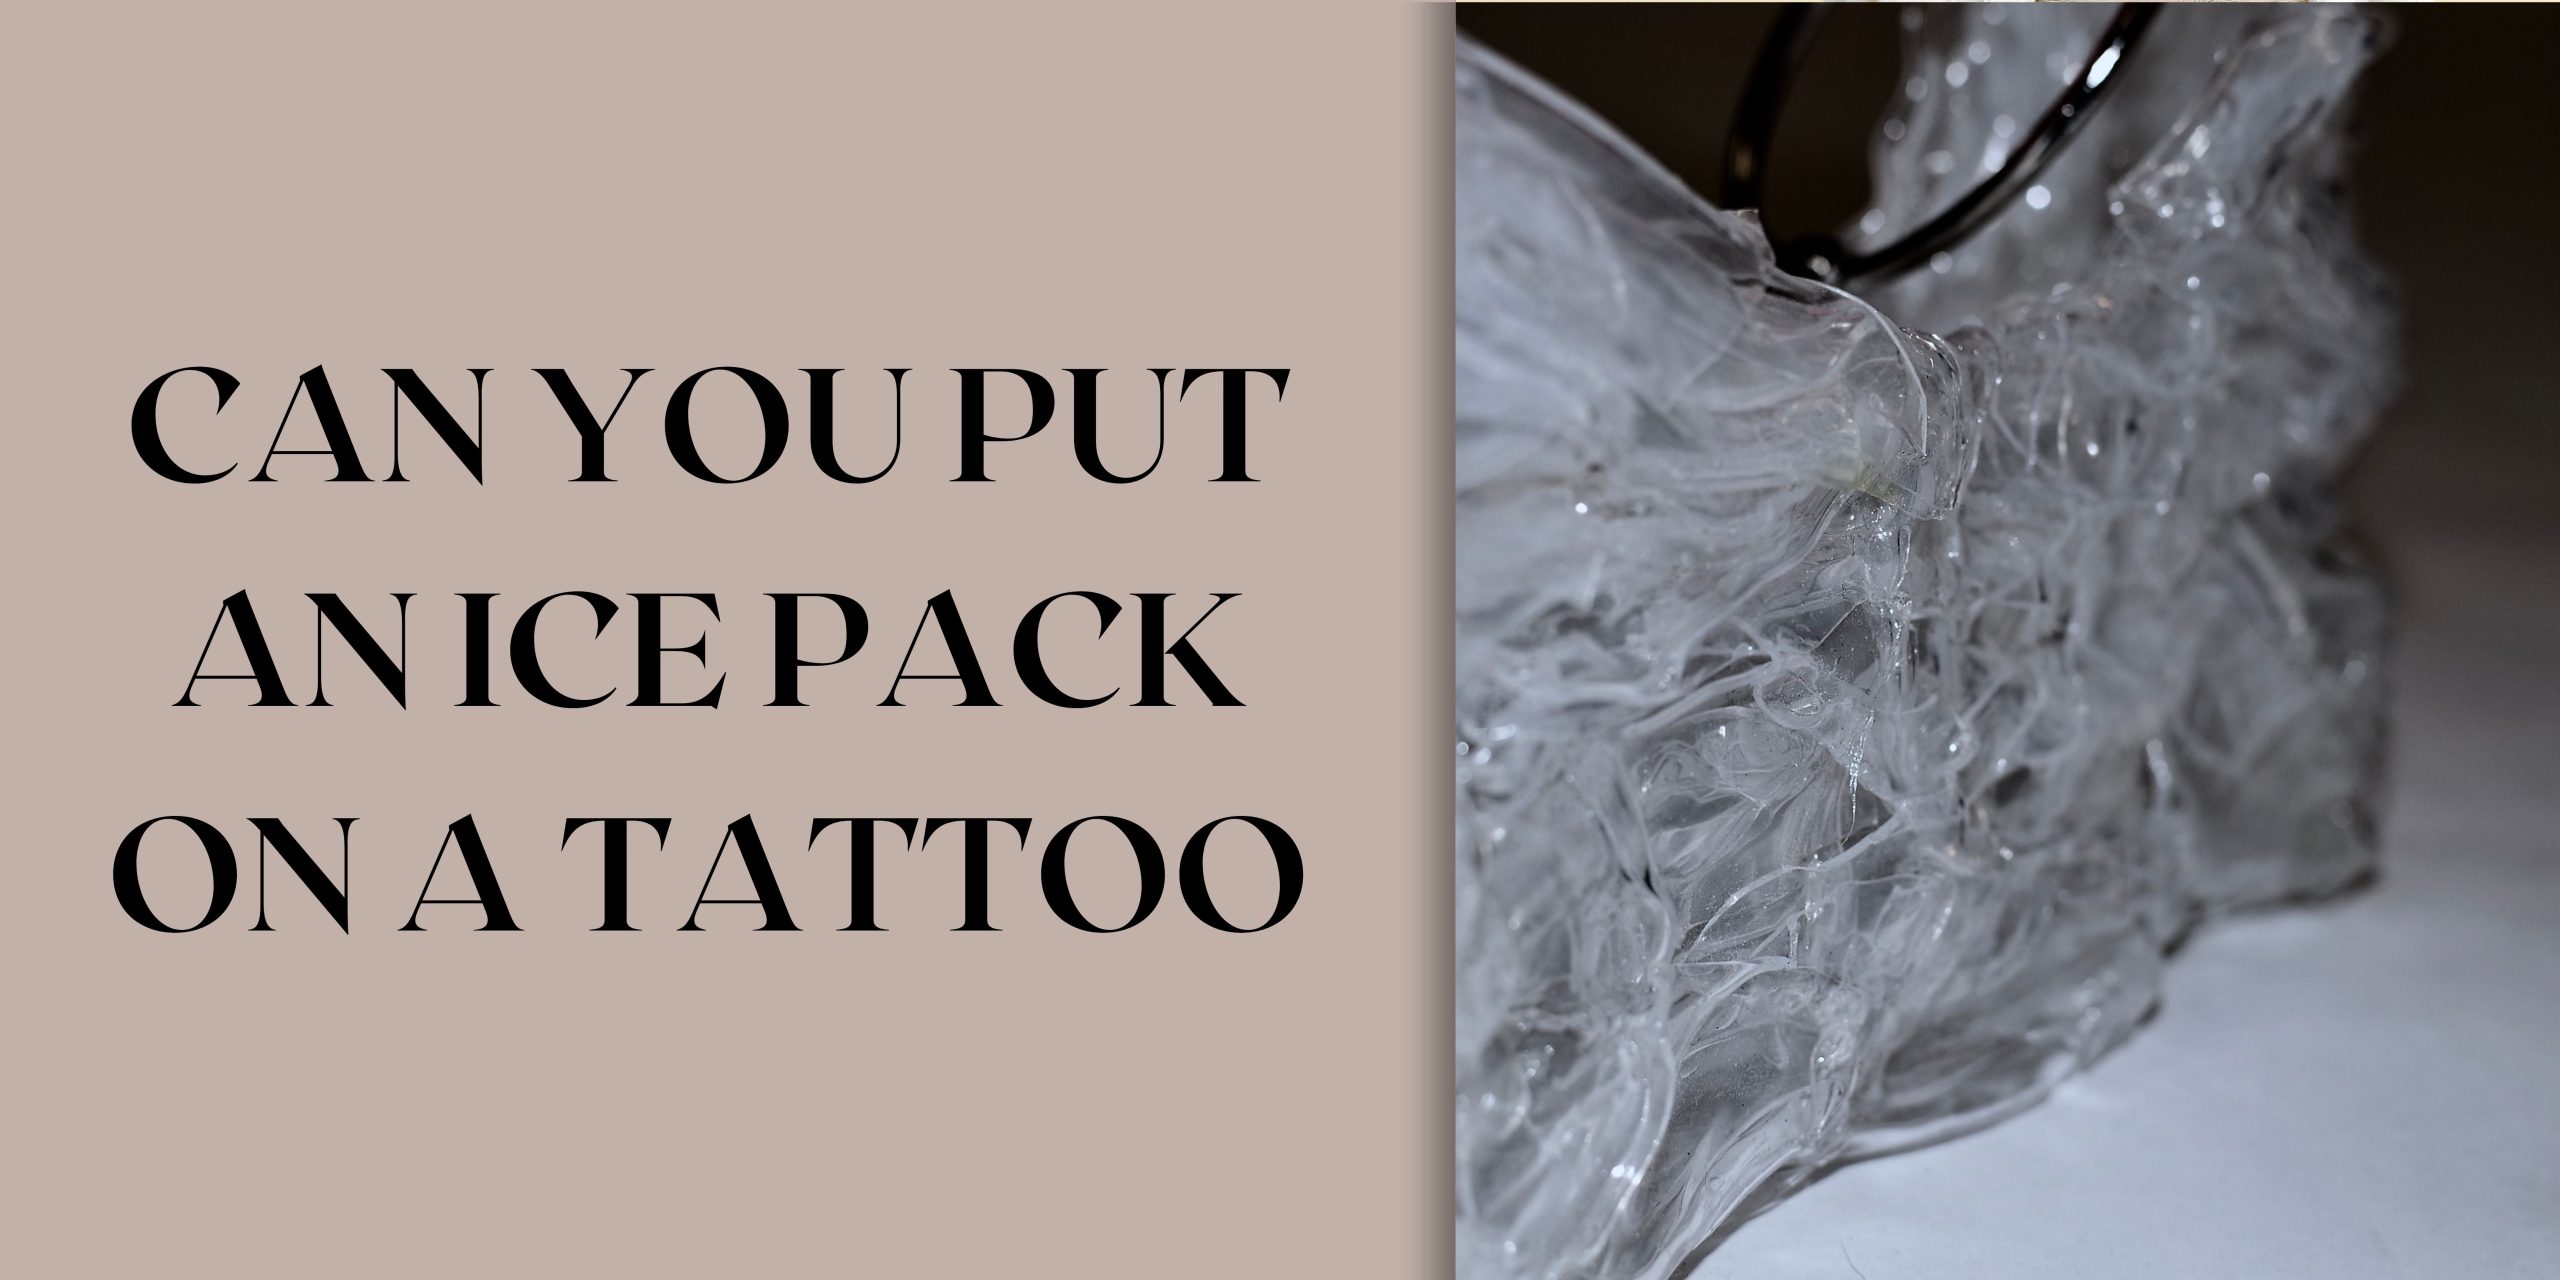 Can you put an ice pack on a tattoo